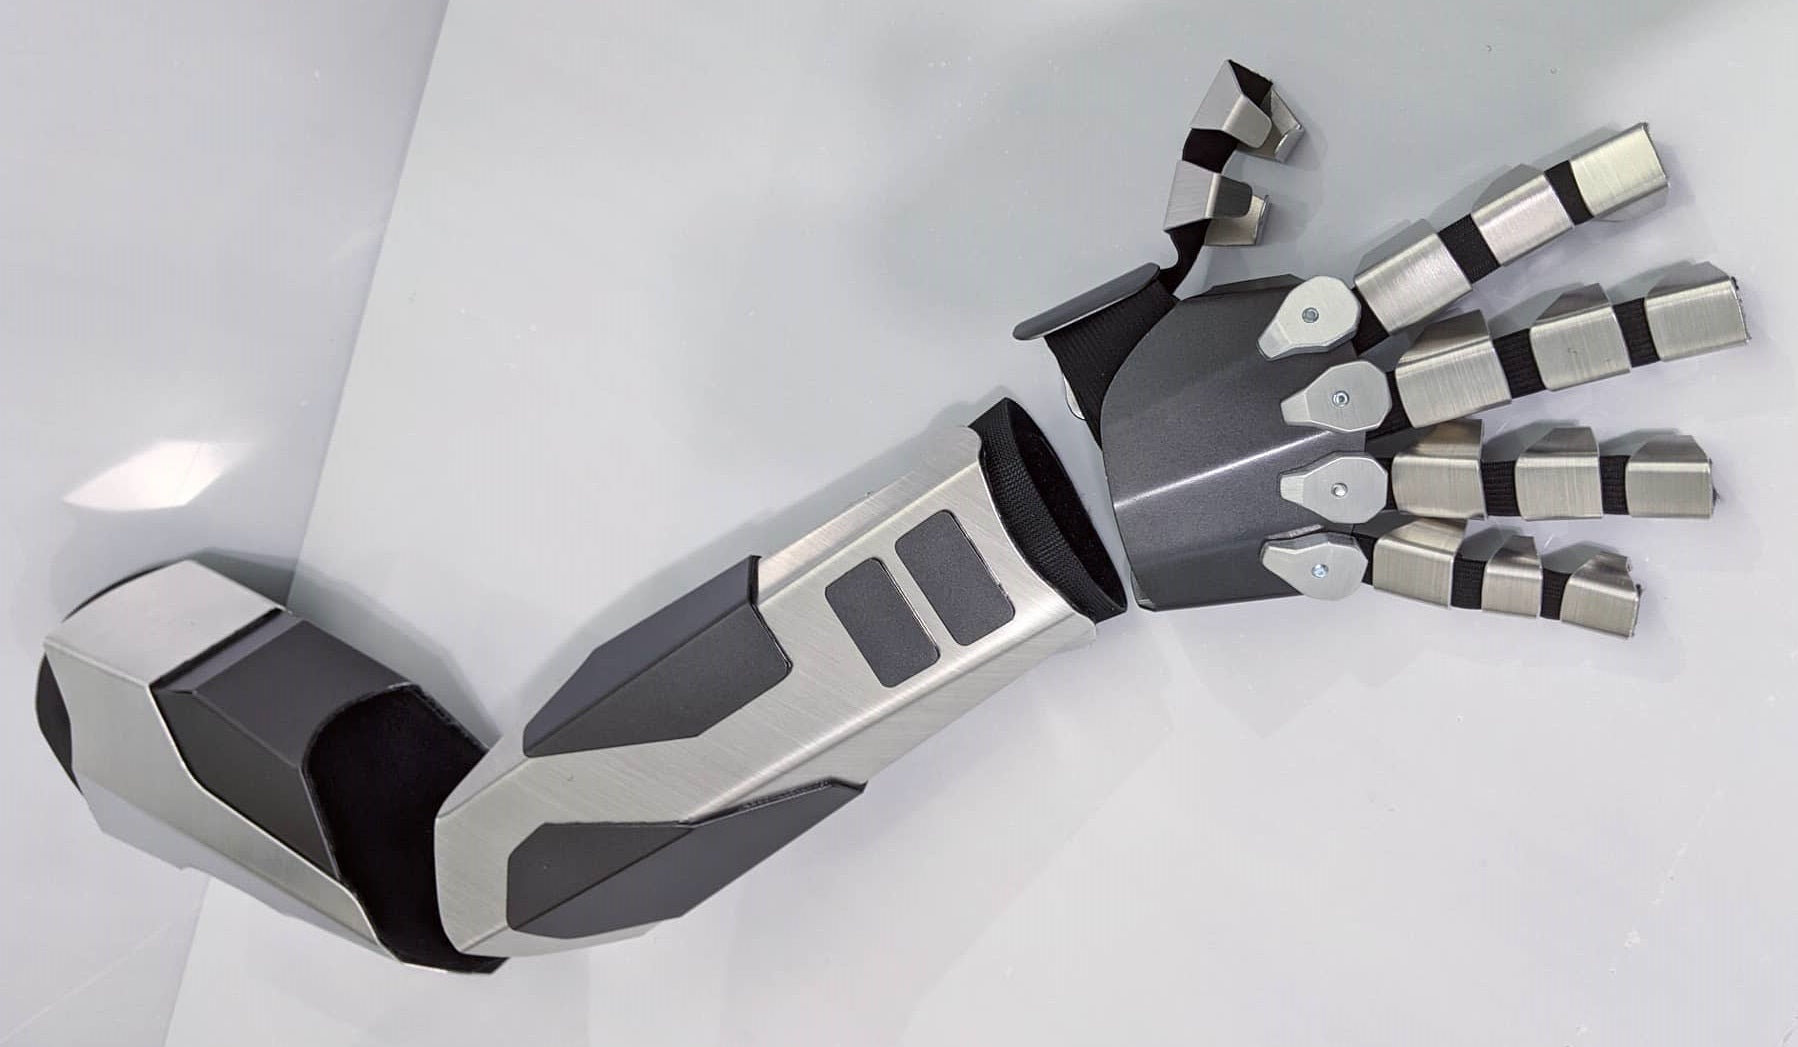 sleek robotic armor covering from shoulder down to the fingers